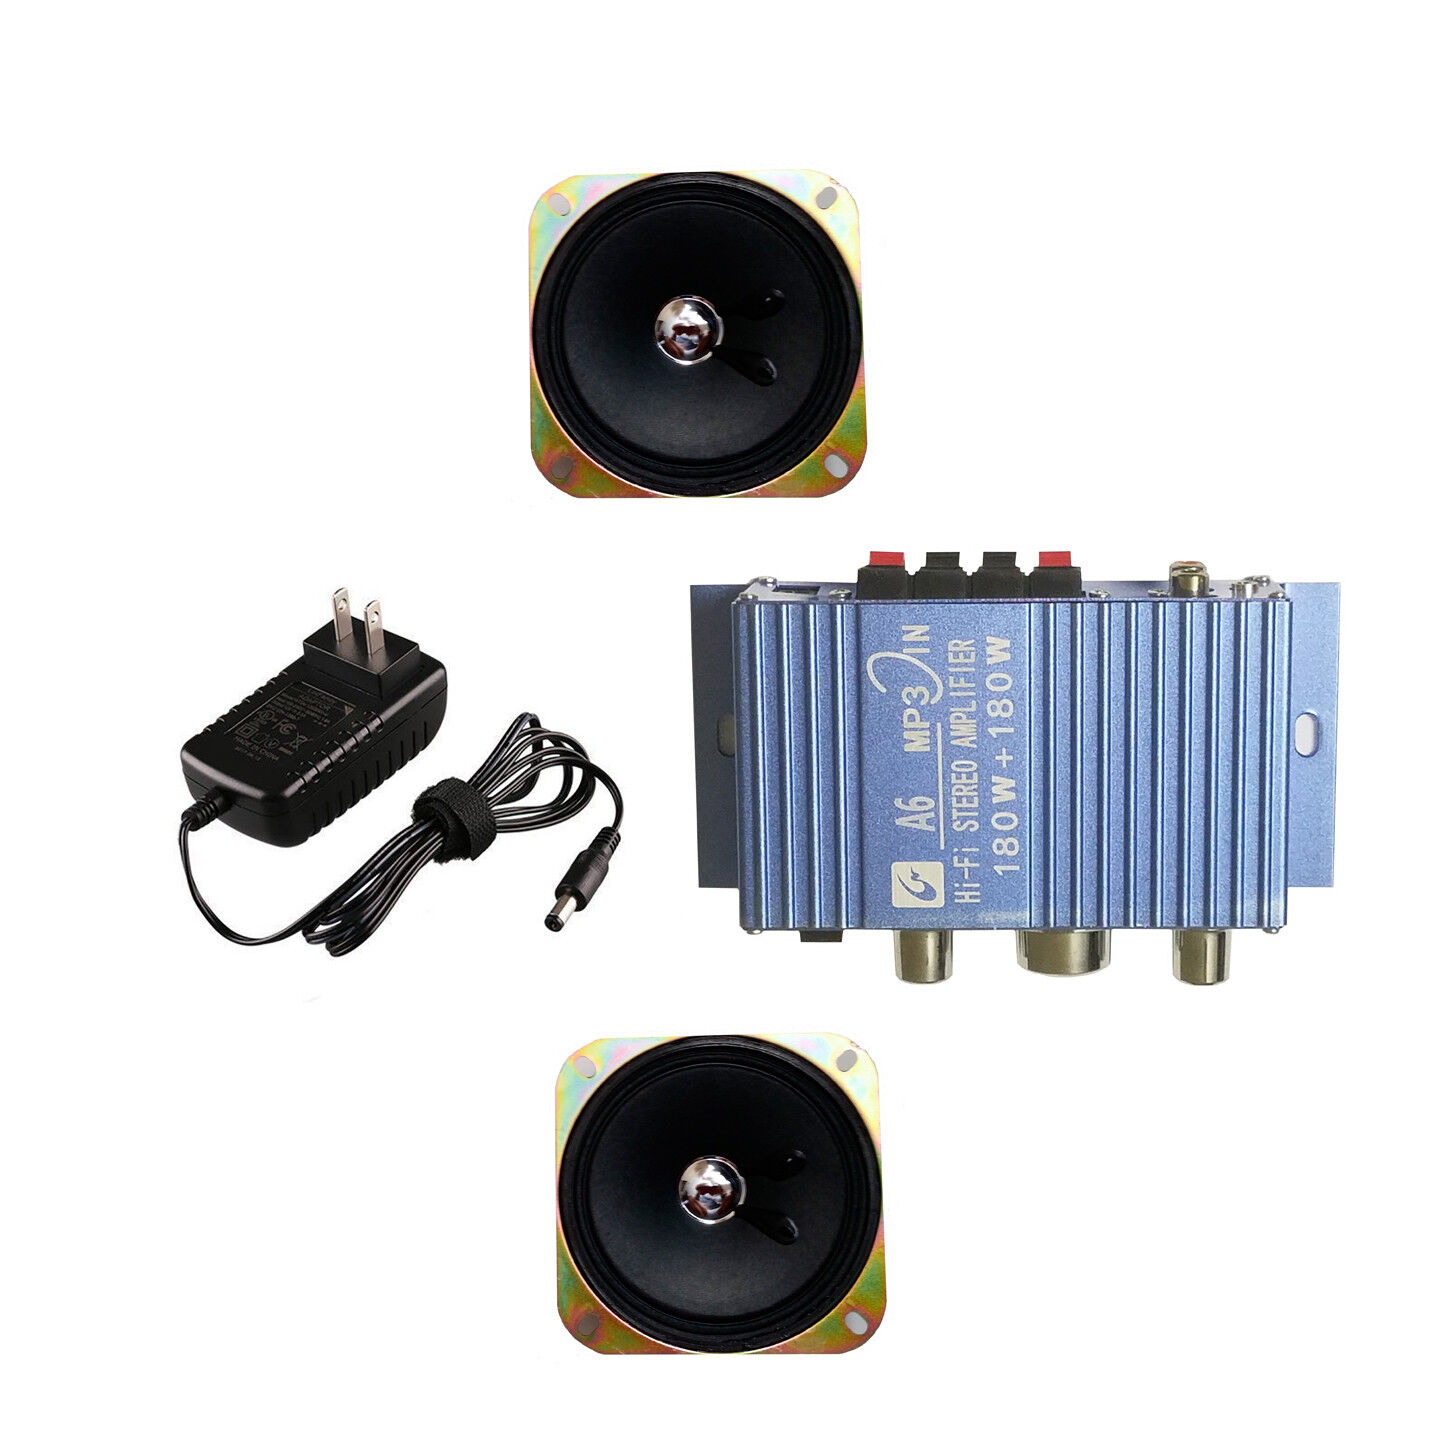 Amplifier Amp and Speaker Upgrade Kit Compatible With Arcade1Up